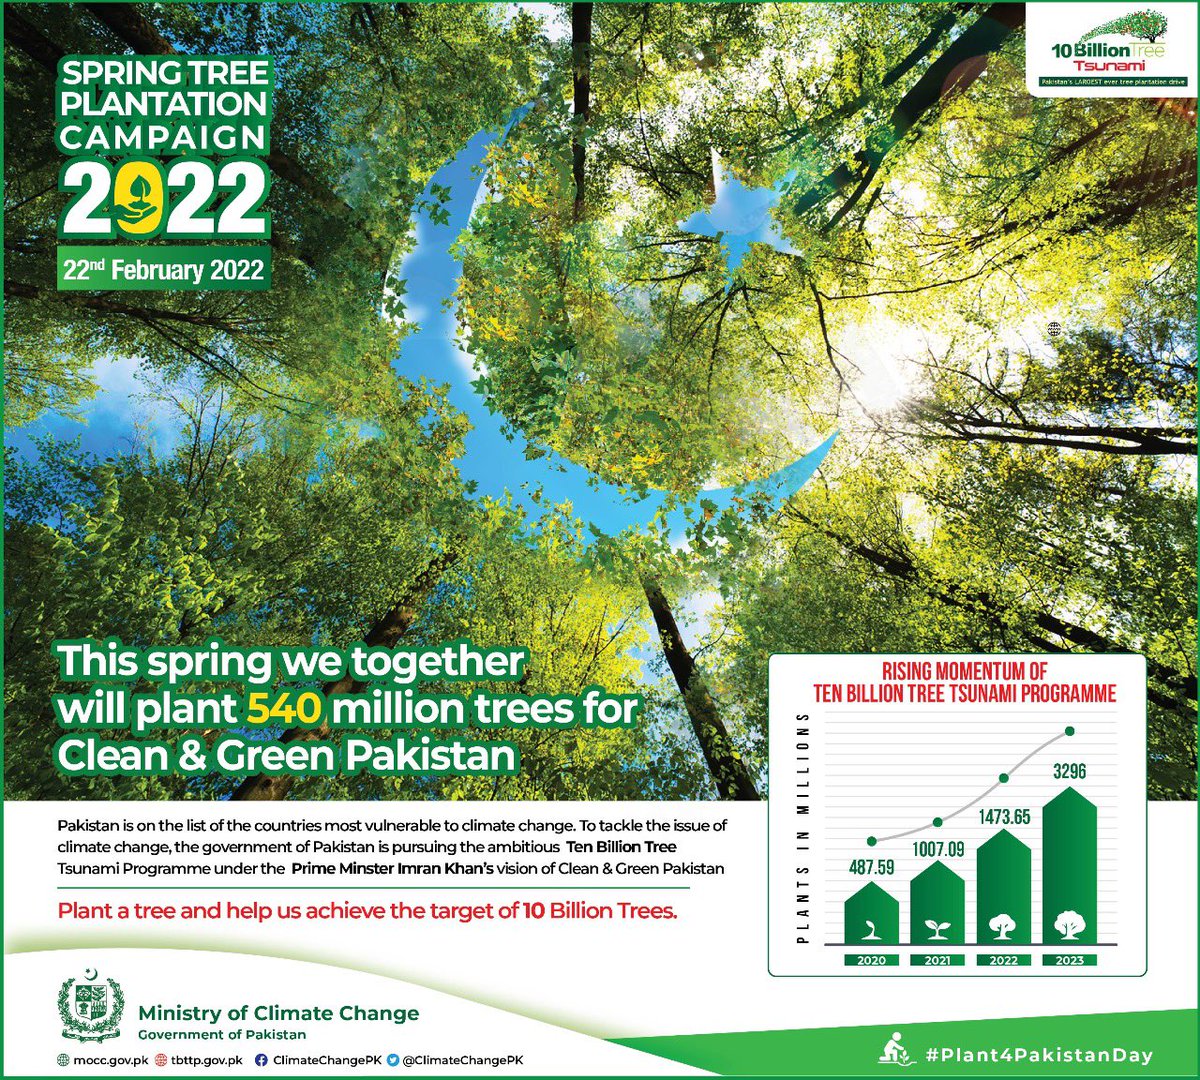 Prime Minister Imran Khan will kick off Spring Tree Plantation Campaign today in Islamabad with a target of planting 540M trees during the spring season. 

#Plant4Pakistan 

#CleanAndGreenPakistan